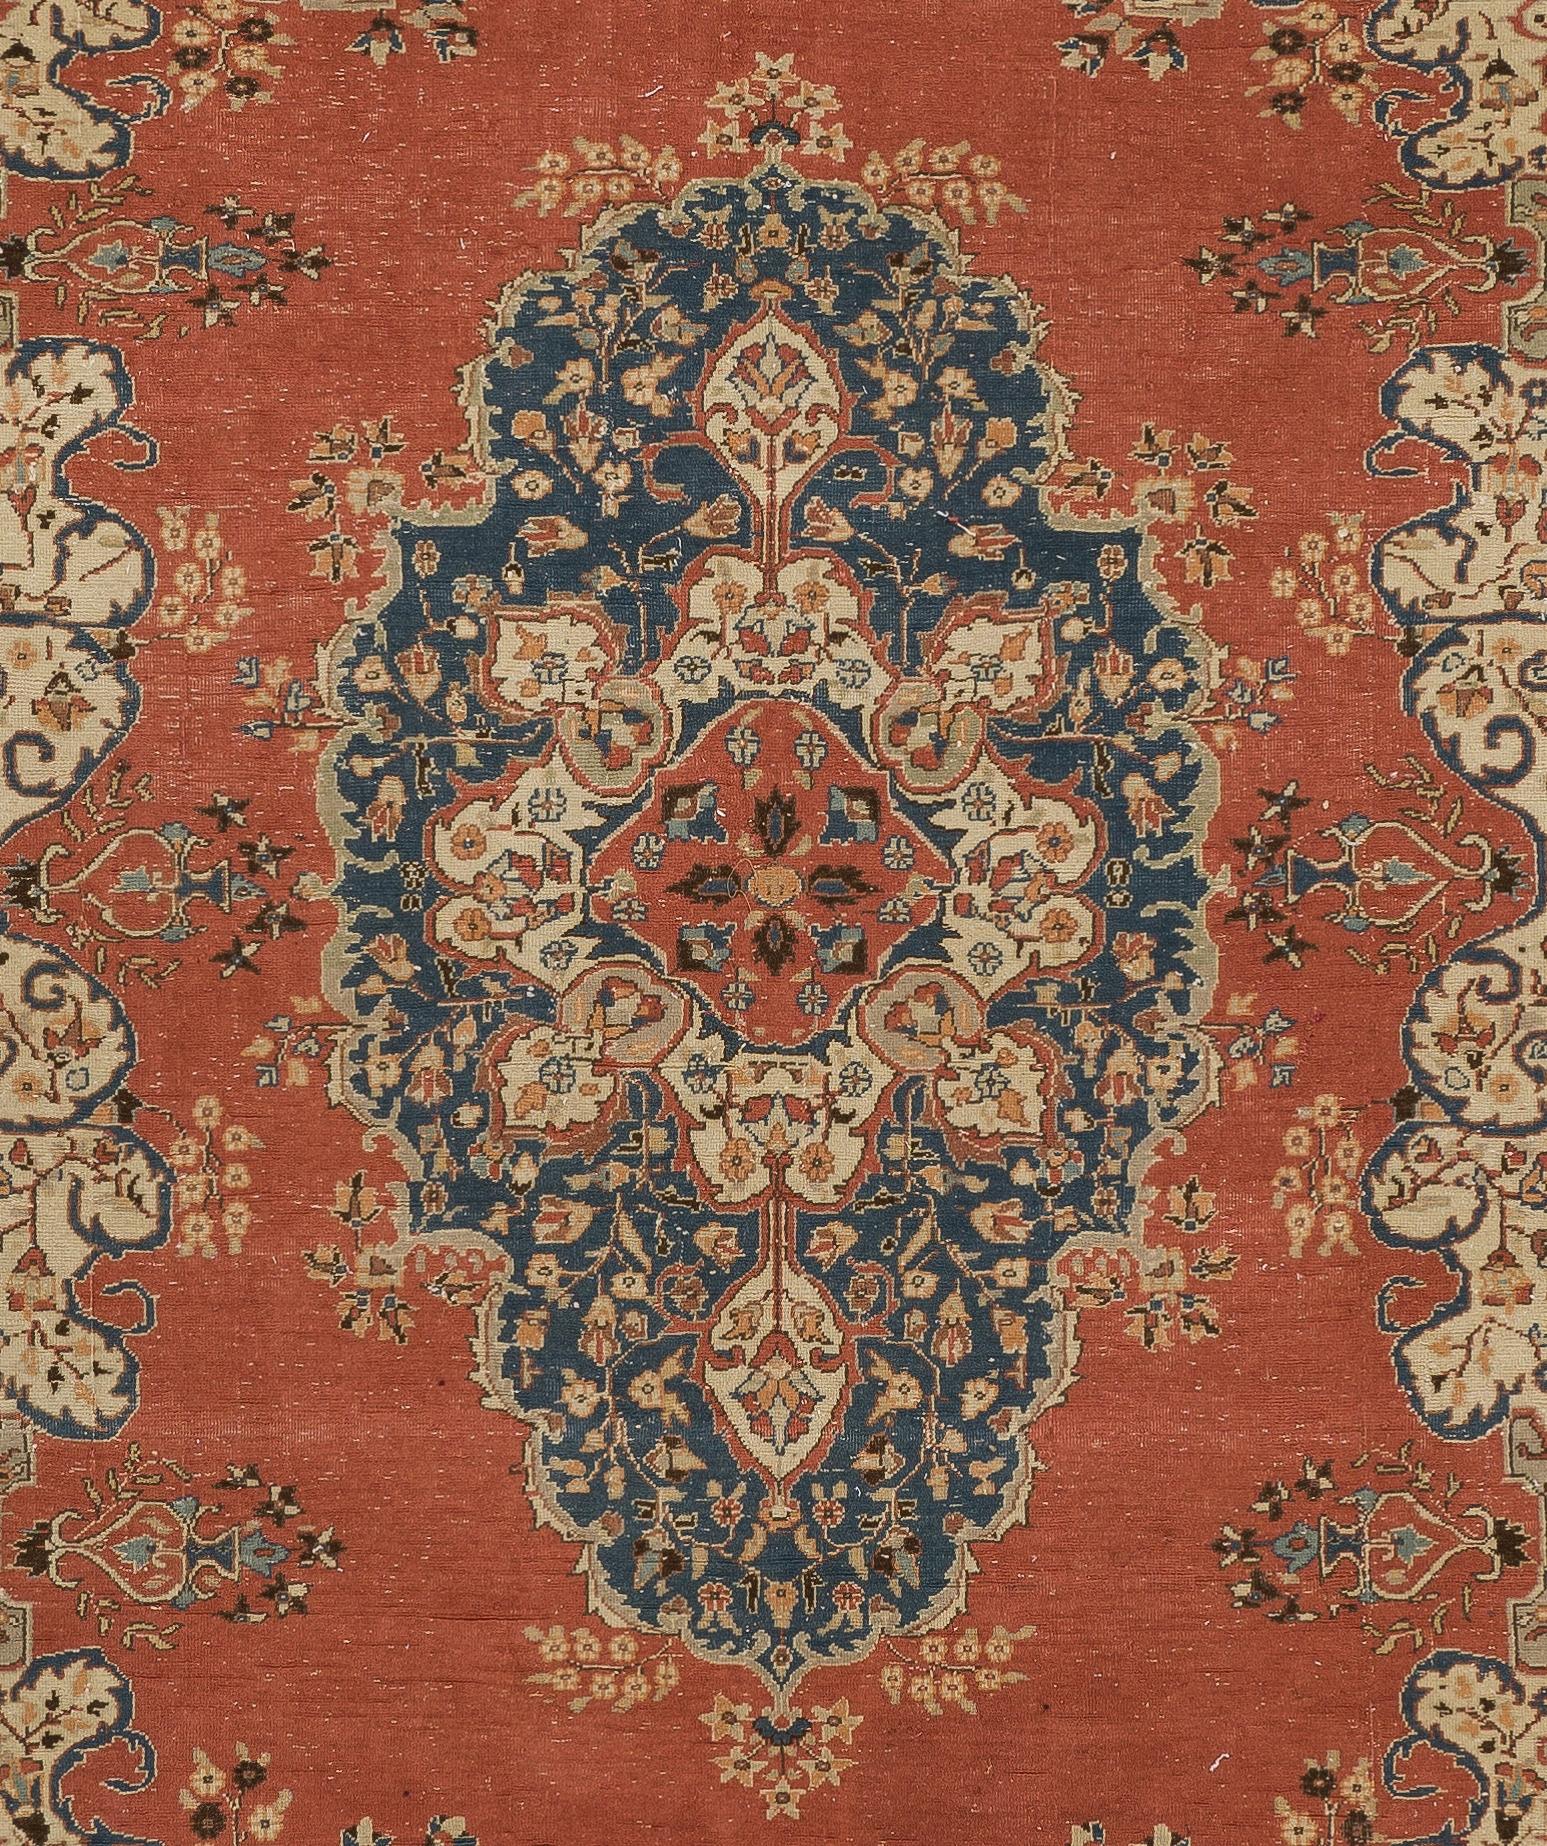 Hand-Knotted 7x10 Ft Fantastic Vintage Turkish Ladik Rug in Brick Red, Blue and Beige Colors For Sale